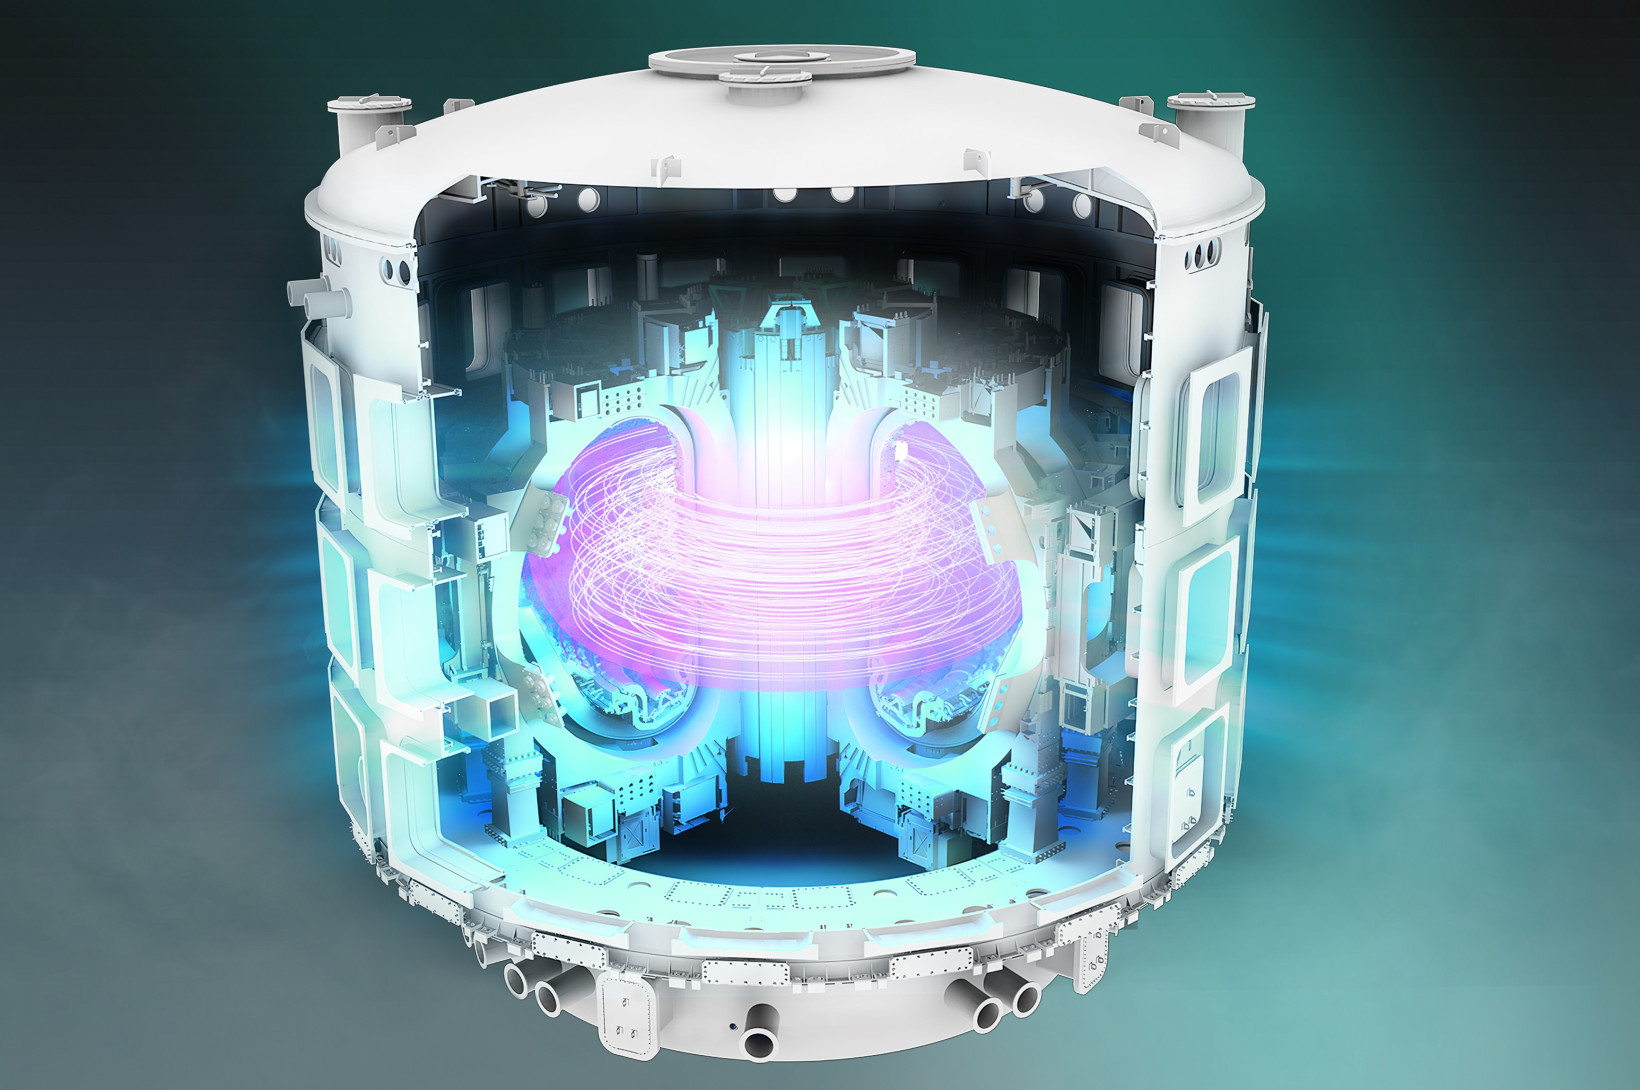 the ITER fusion plant computer-generated image